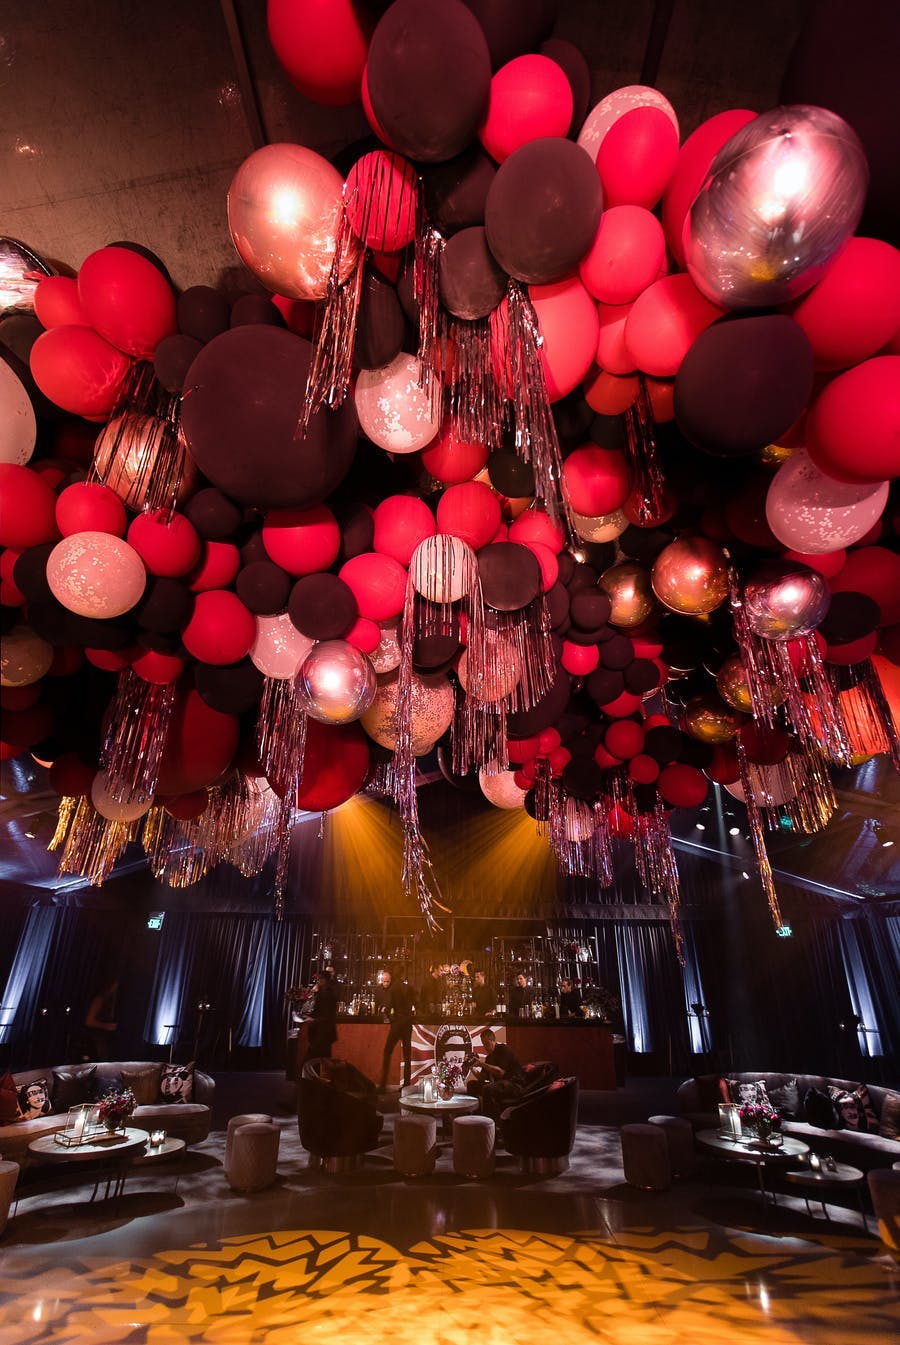 An image looking up at the ceiling with red, black and white balloons.